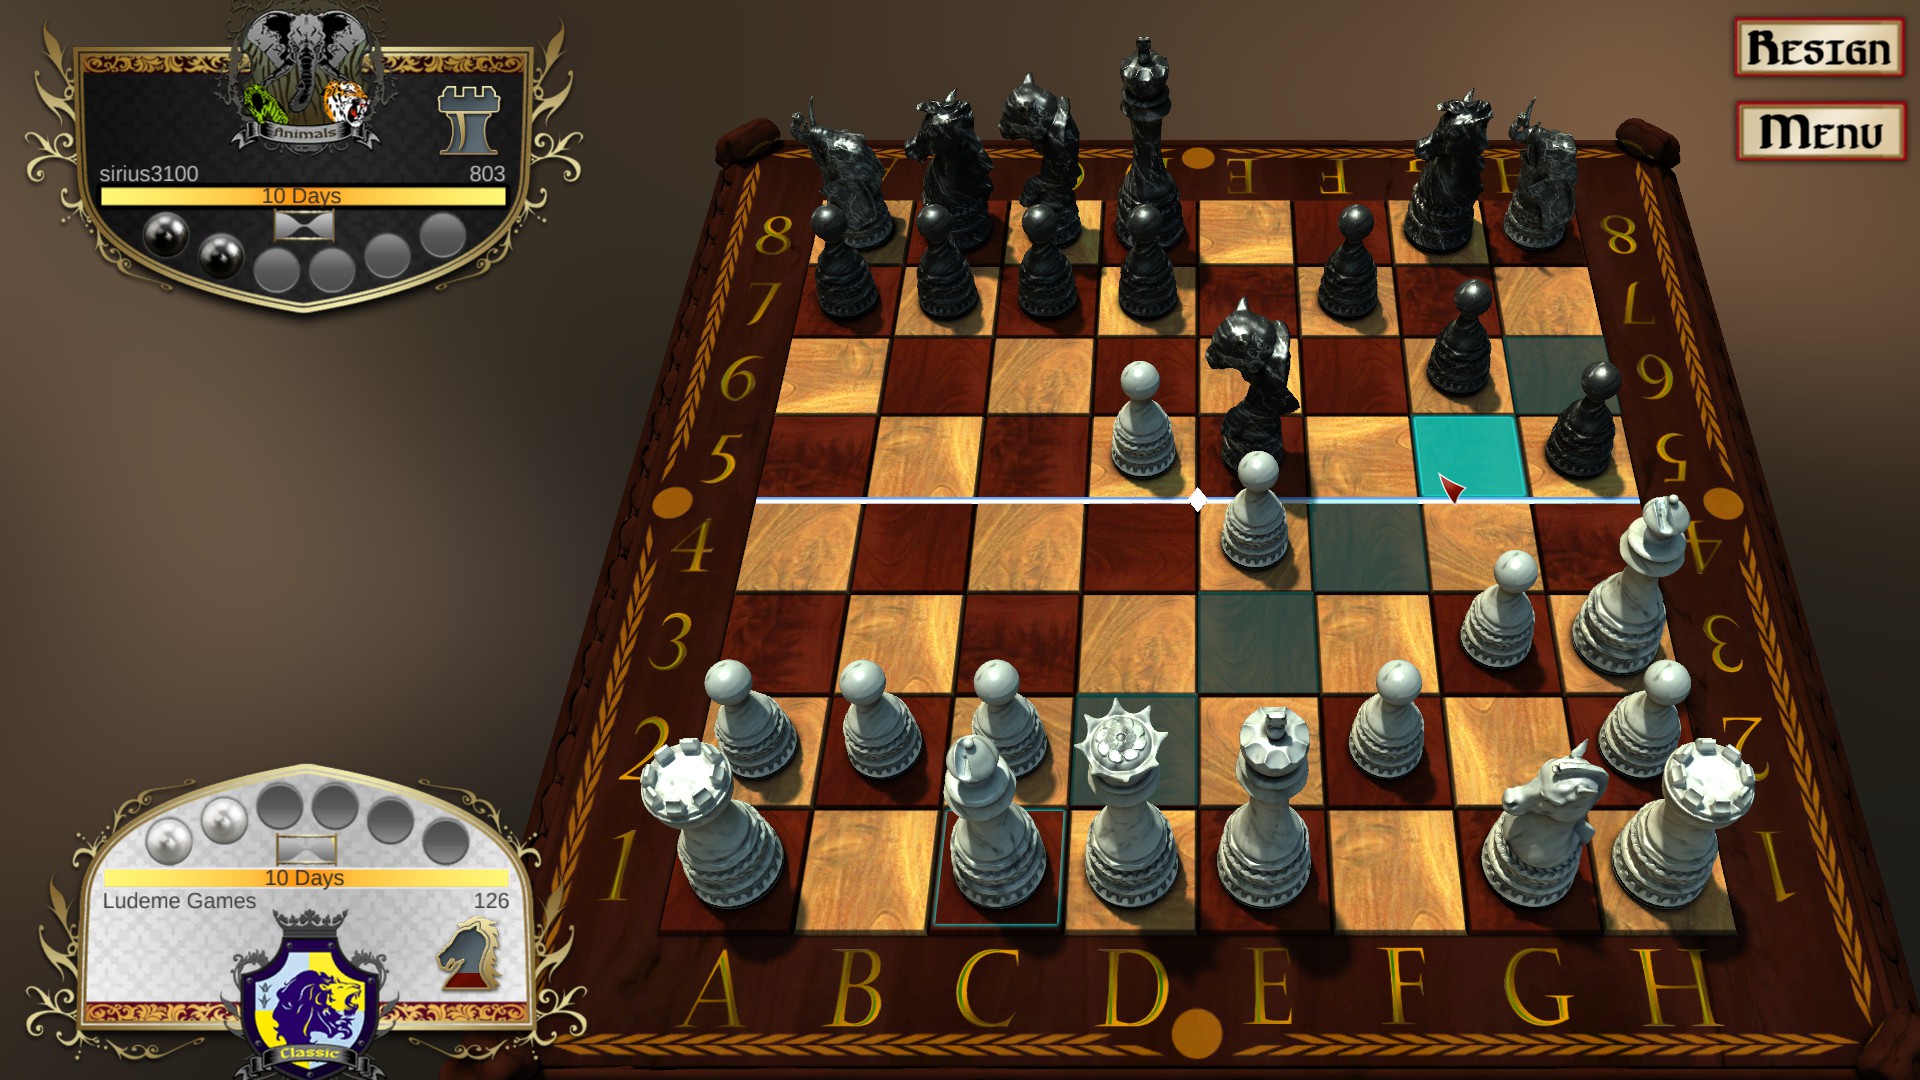 what was the most classic chess game emulating a battle